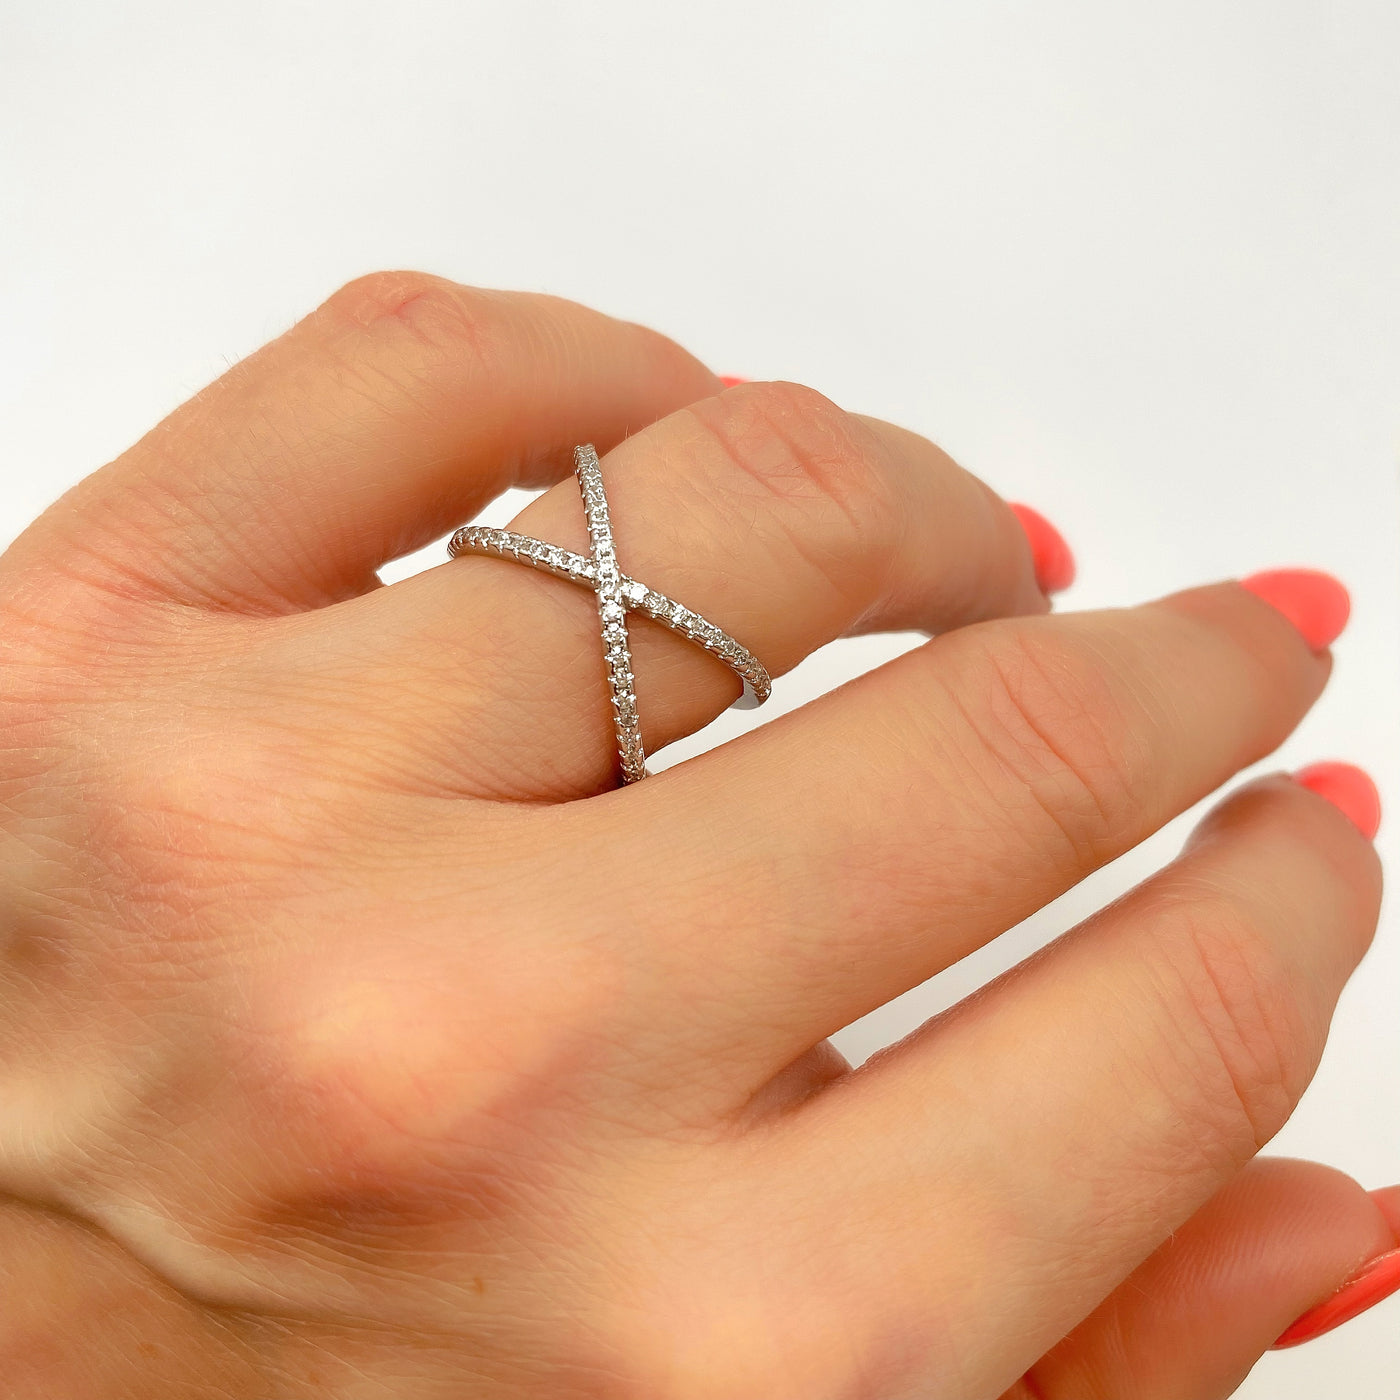 Silver crossed ring with zirconia